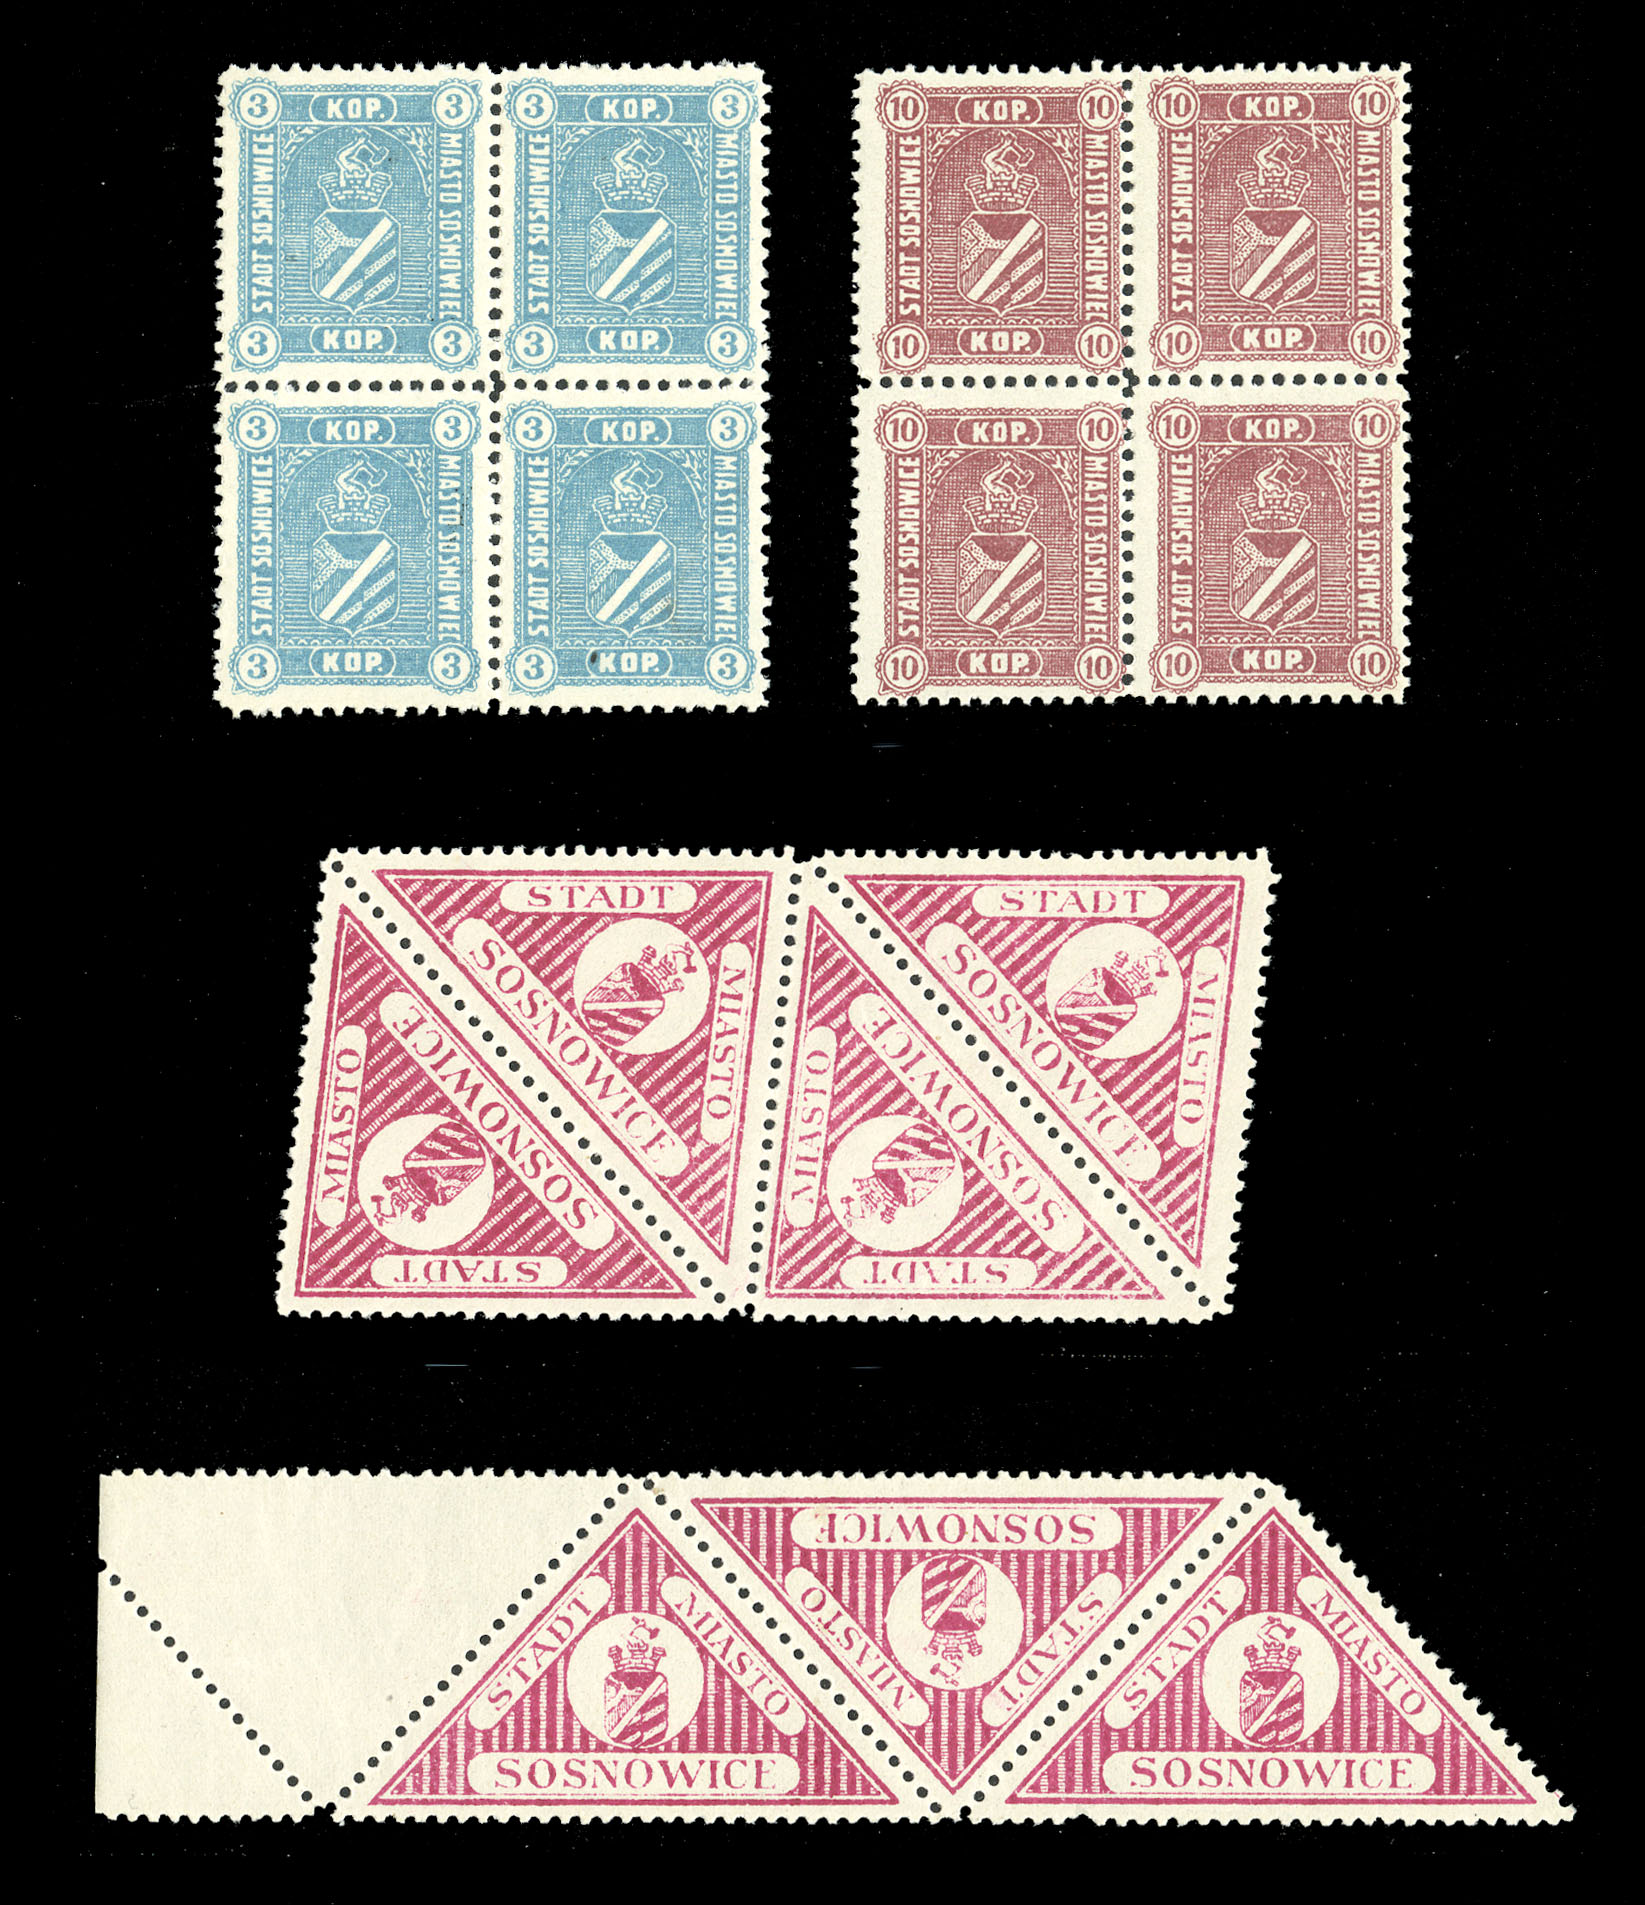 Lot 1198 - LARGE LOTS AND COLLECTIONS ISRAEL  -  Cherrystone Auctions U.S. & Worldwide Stamps & Postal History